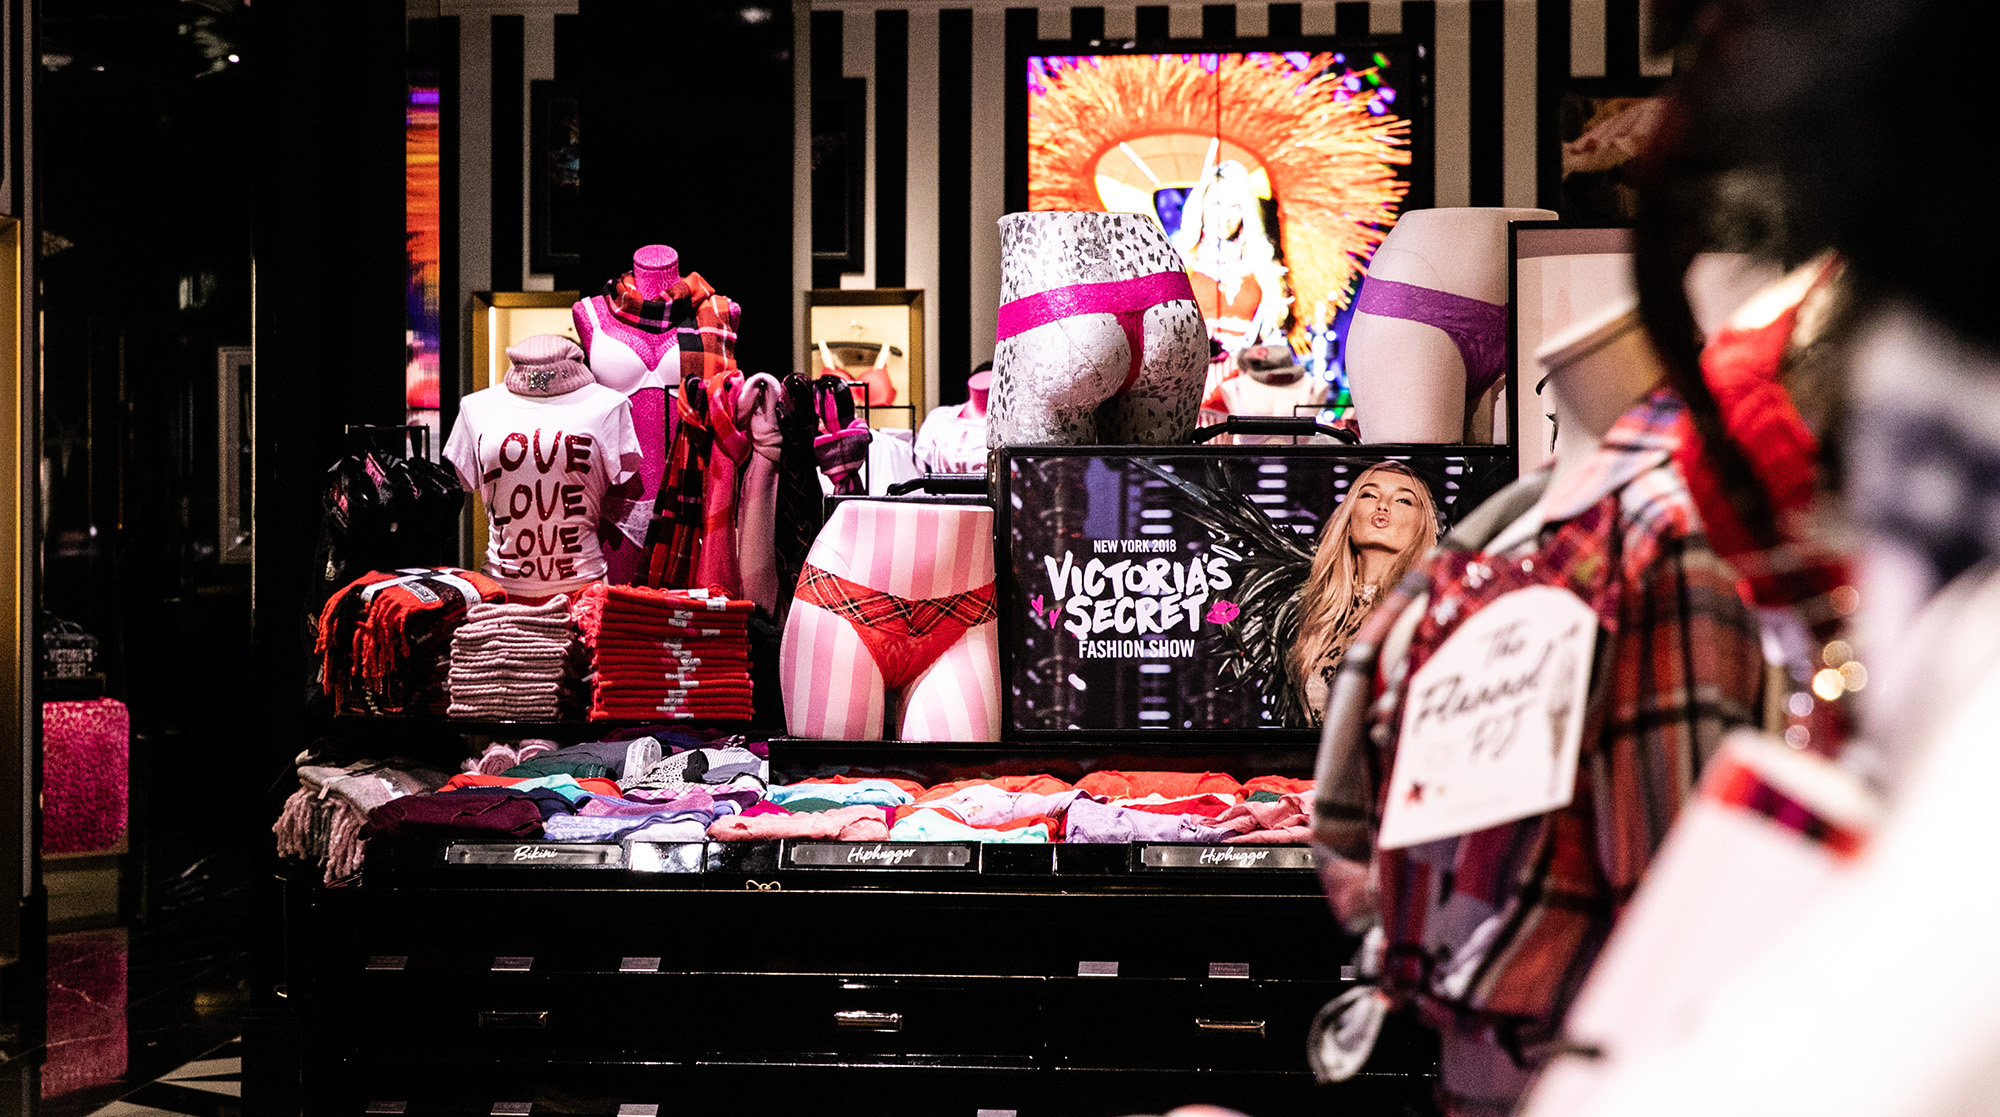 Victoria's Secret Owner Cancels Sycamore Sale, LB Stock Sinks - Bloomberg